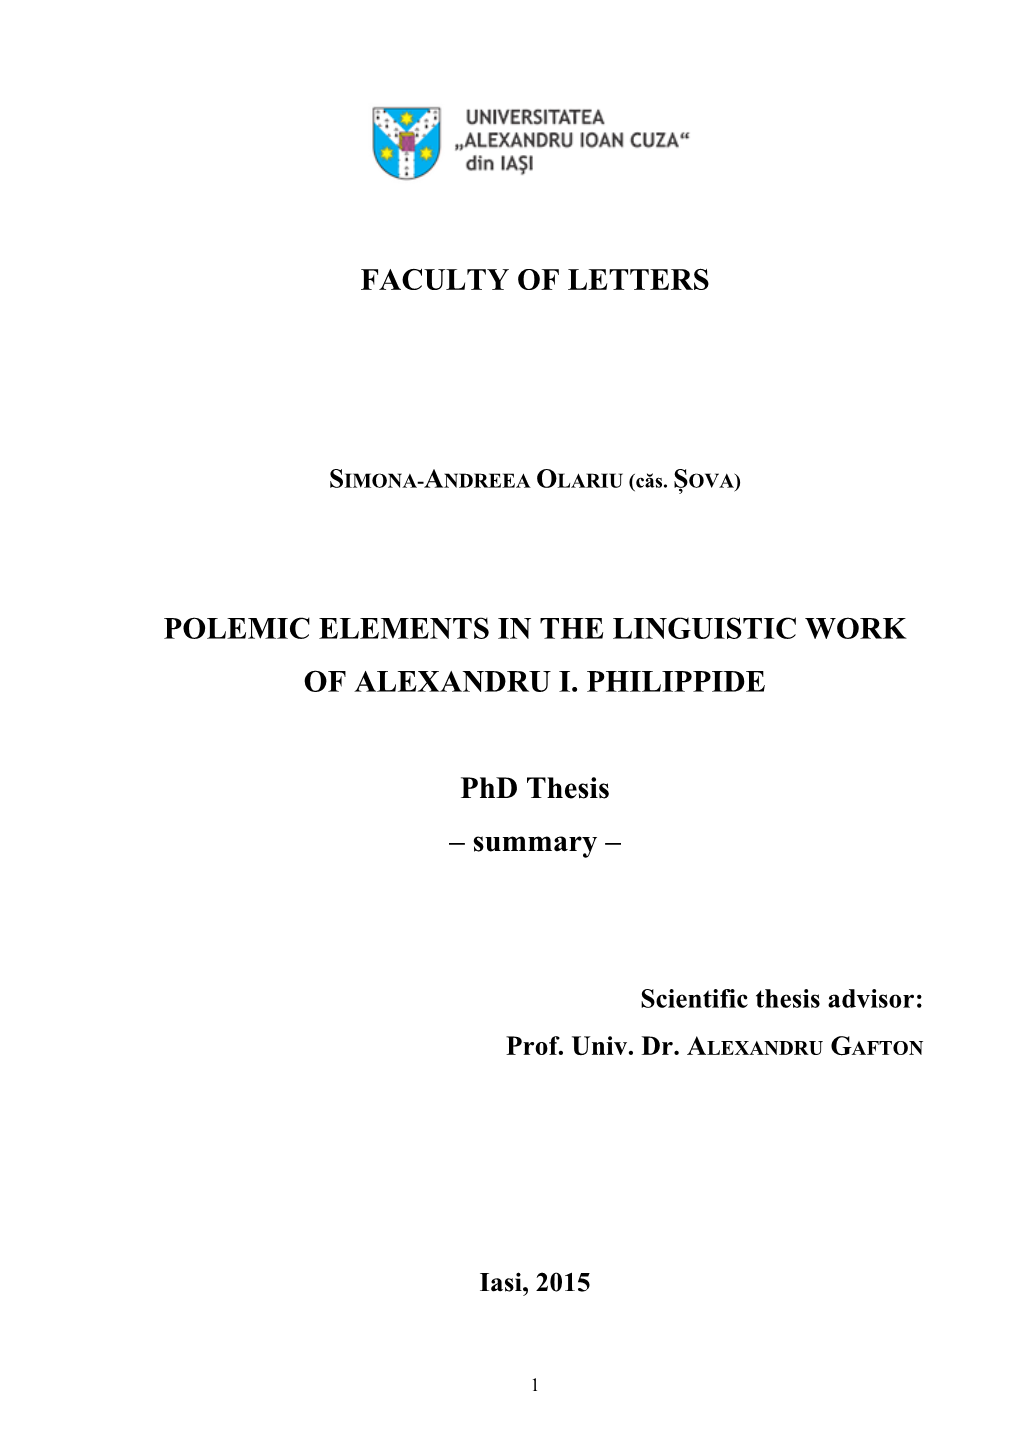 Faculty of Letters Polemic Elements in the Linguistic